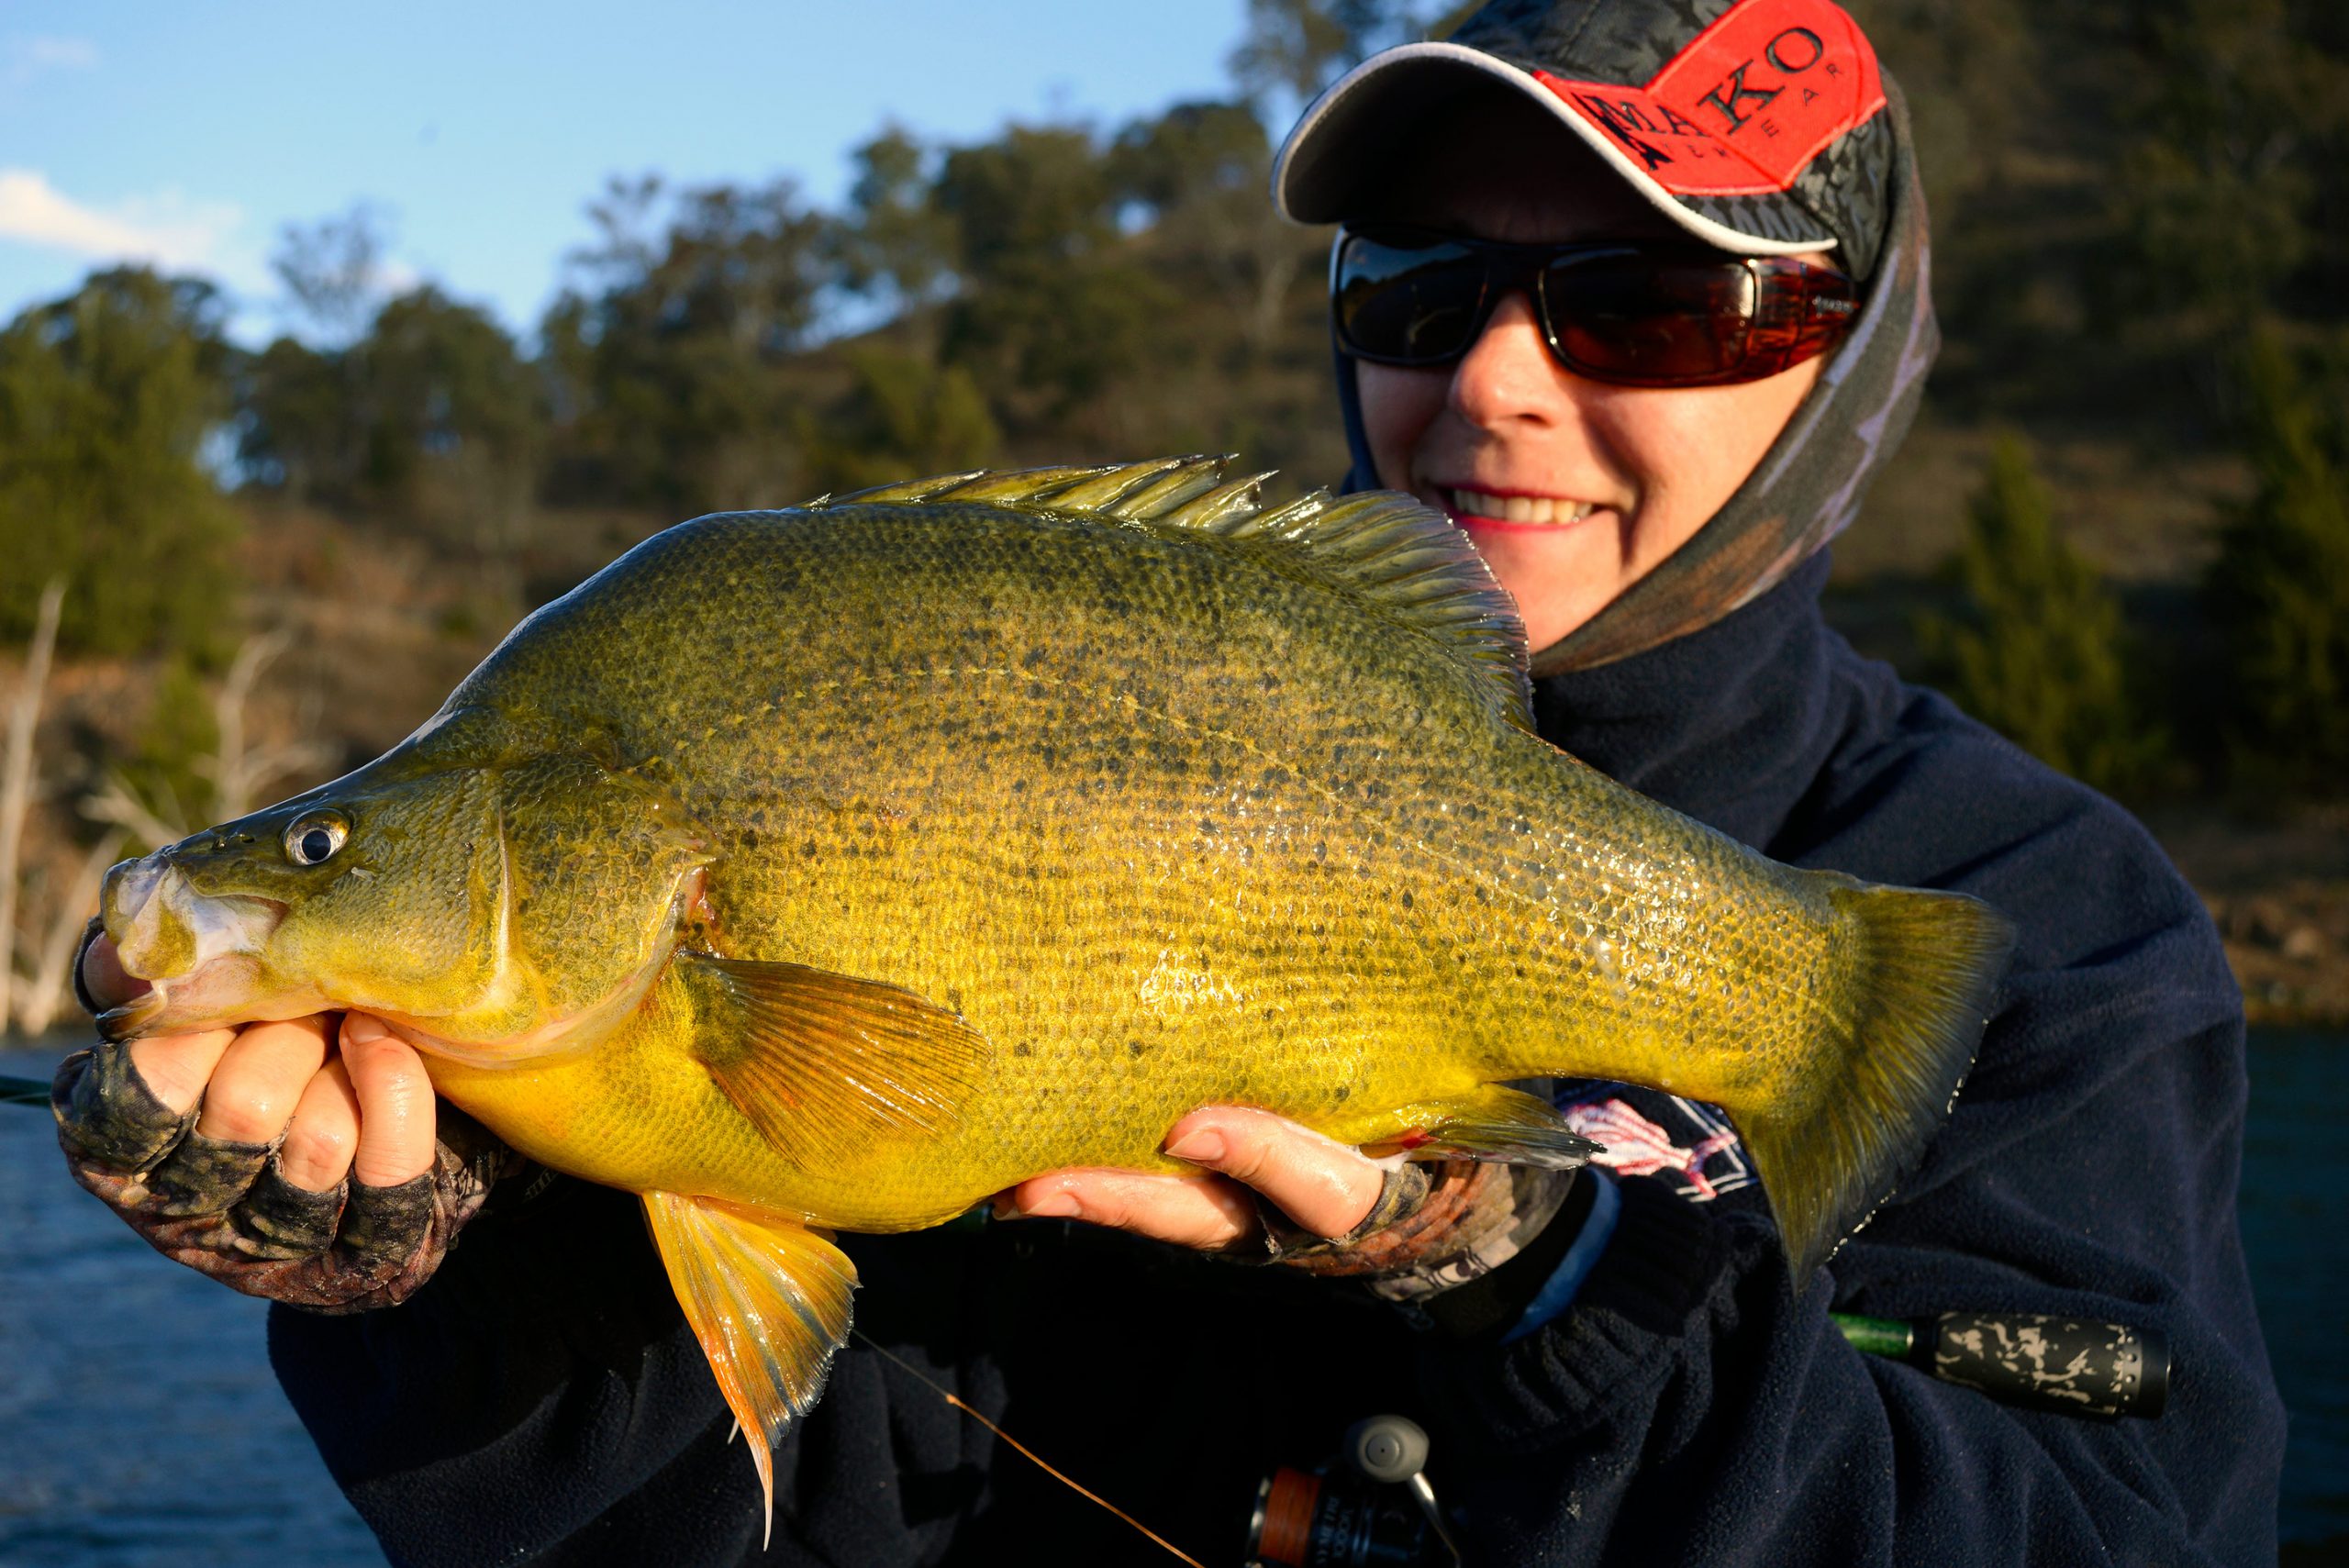 Jo Starling with a lovely golden perch from Burrinjuck Dam, NSW.